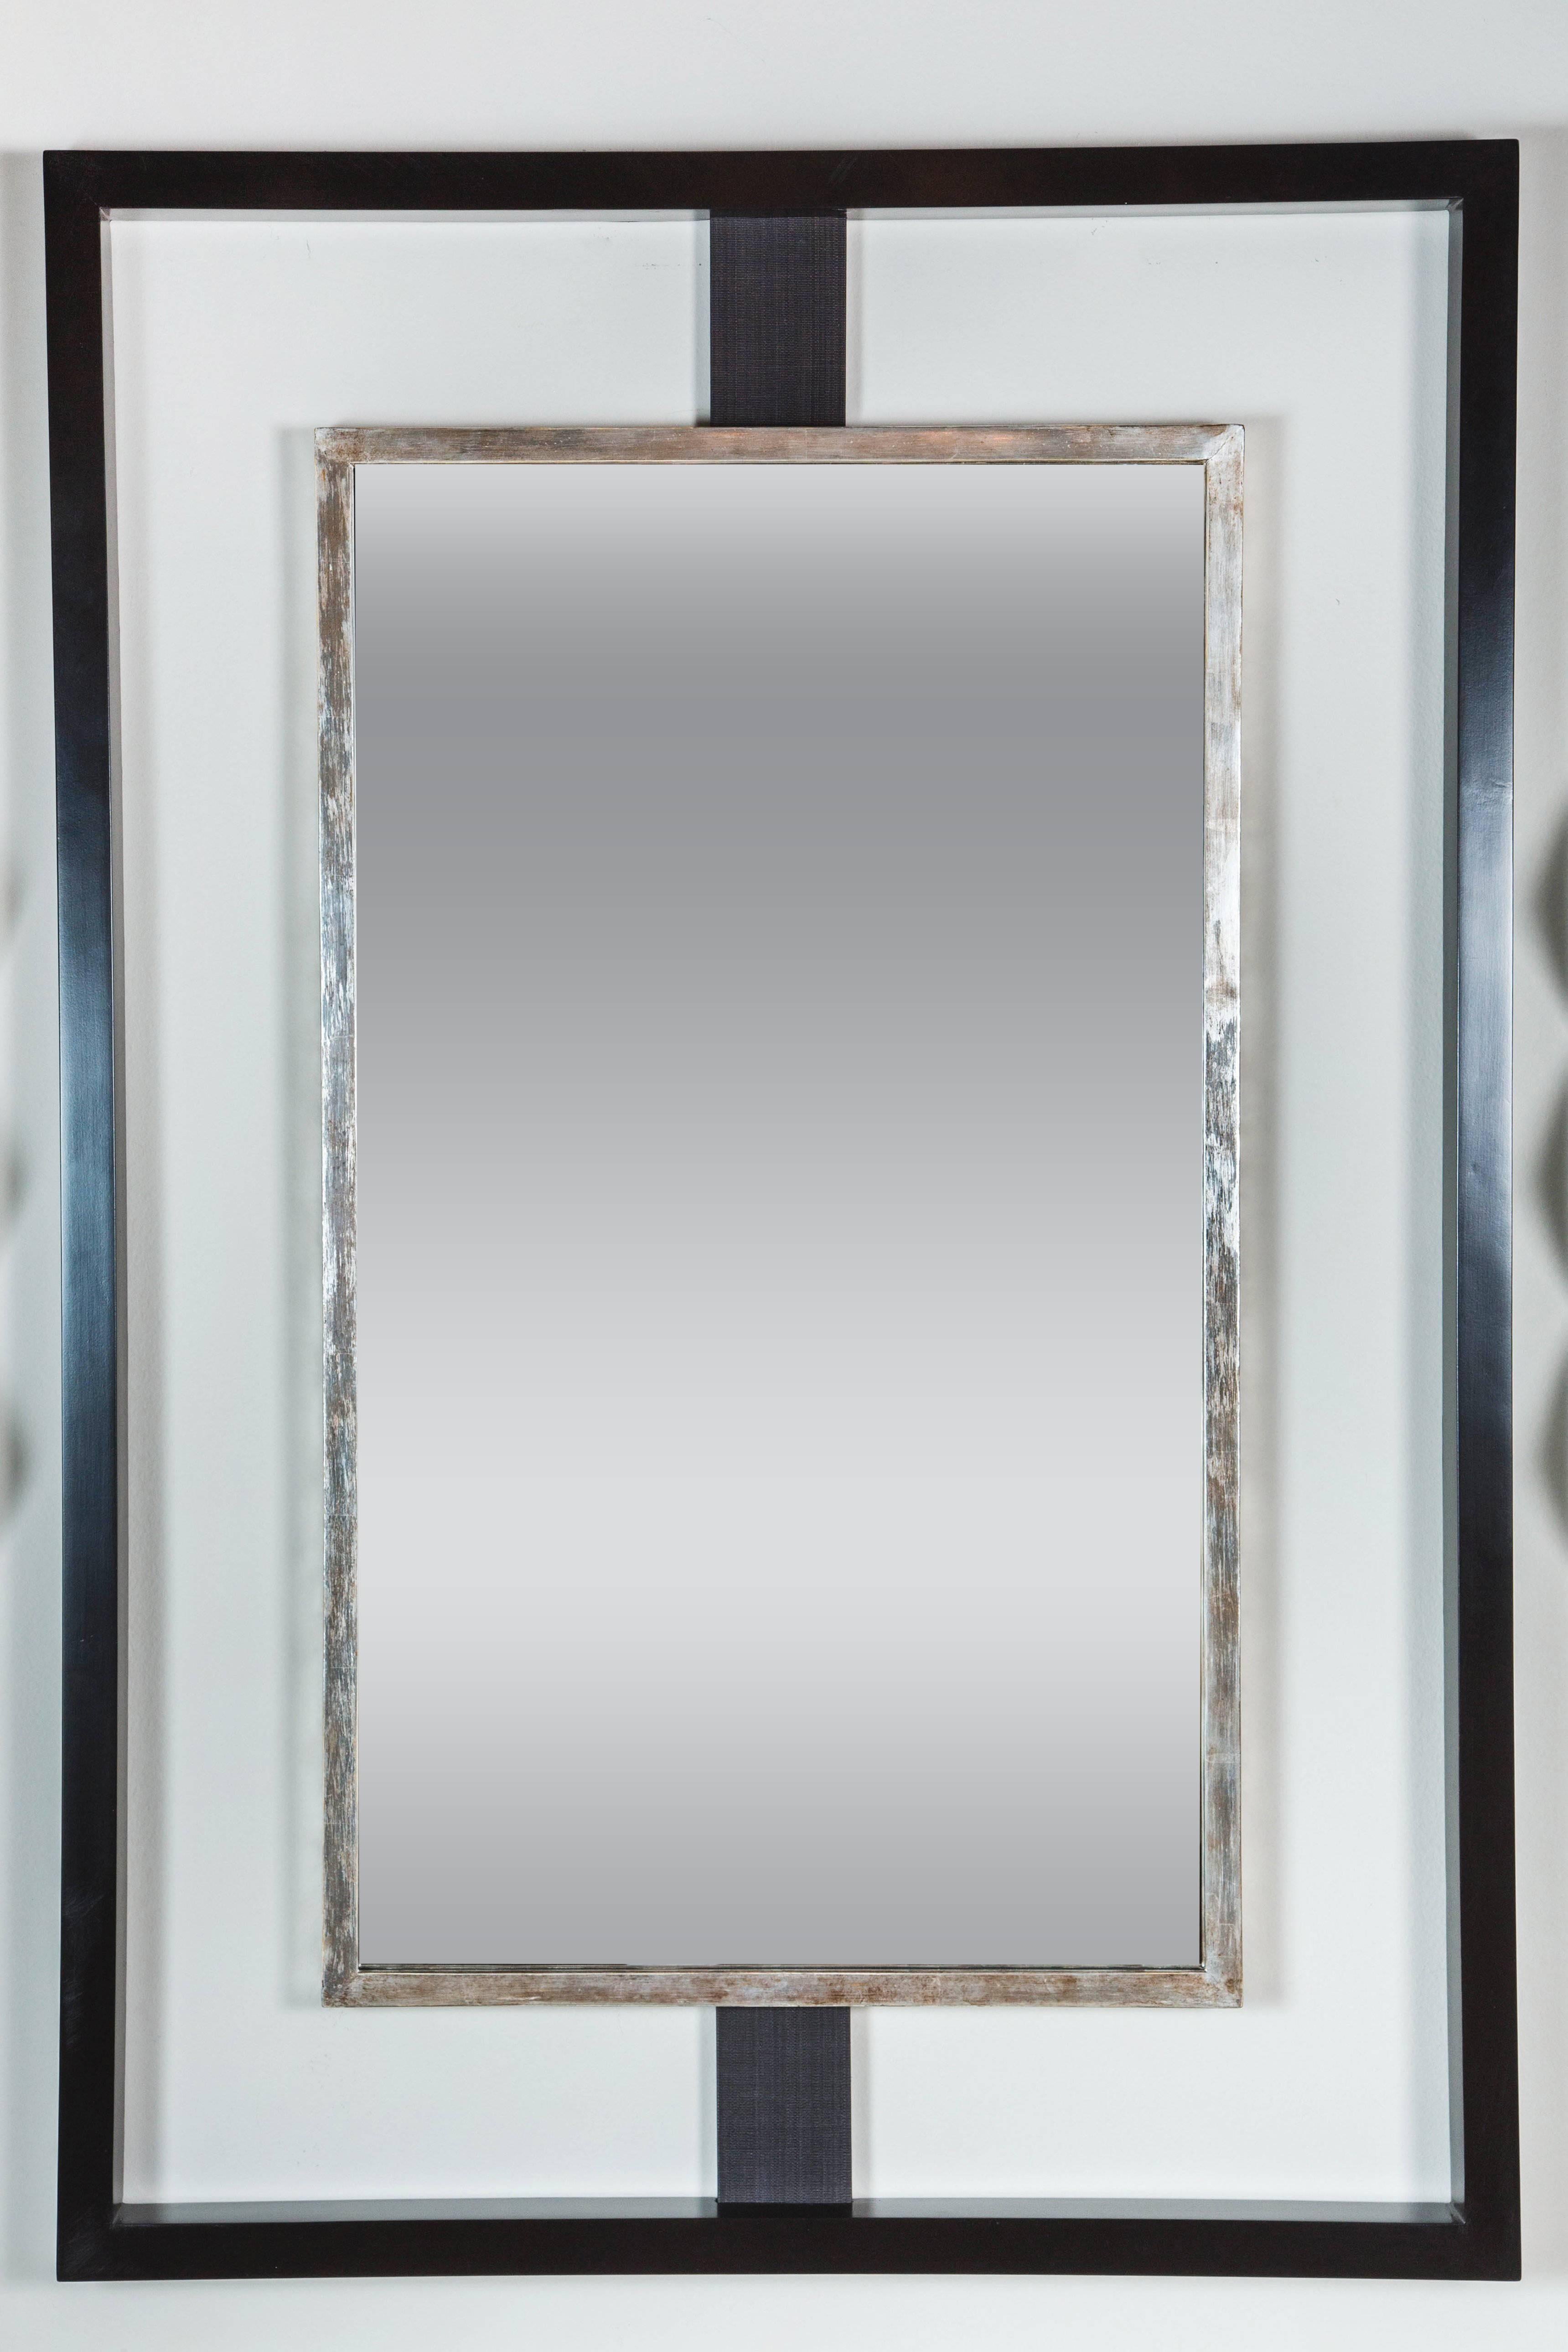 Modern Paul Marra Negative Space Mirror shown in ebony stained outer frame and distressed silver inner frame, dark gray-black horsehair strut. By order,  production lead approximately 6 weeks. Due to materials and the hand-made process the wood and